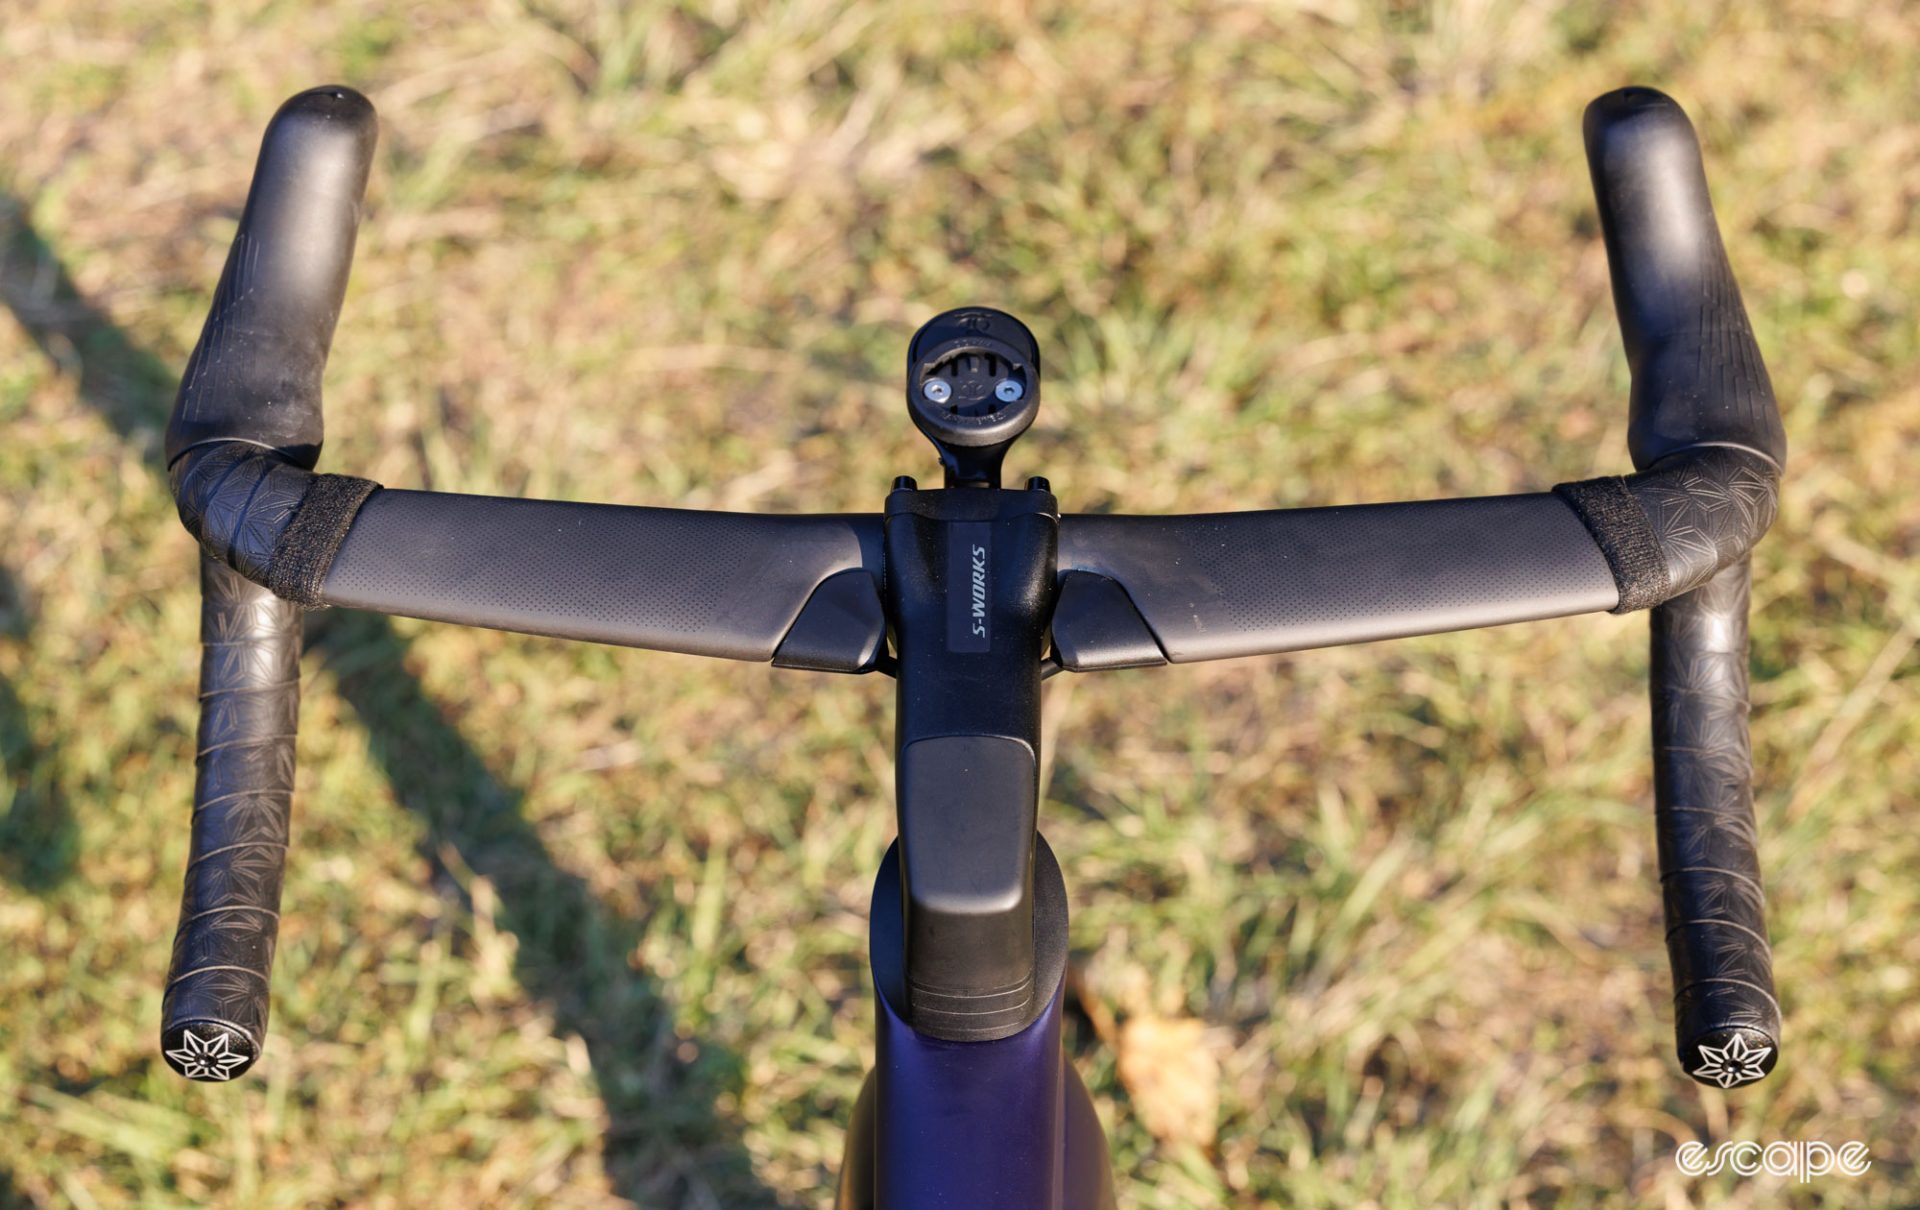 Handlebar view of the Specialized Tarmac SL8 Pro Ultegra. 